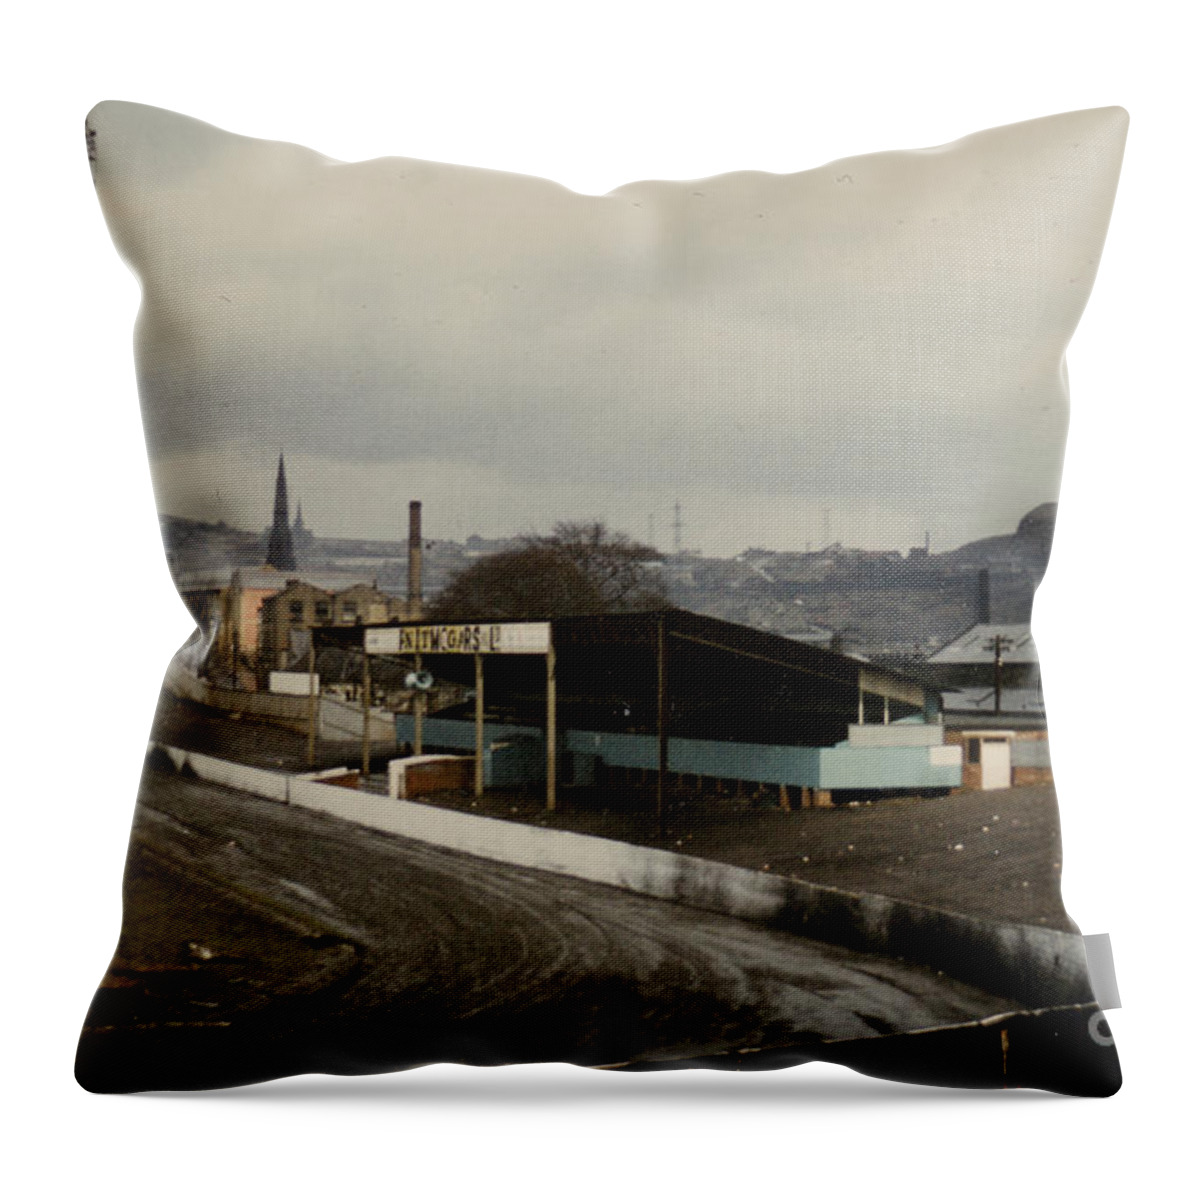  Throw Pillow featuring the photograph Halifax Town - The Shay - East Stand 1 - 1970s by Legendary Football Grounds